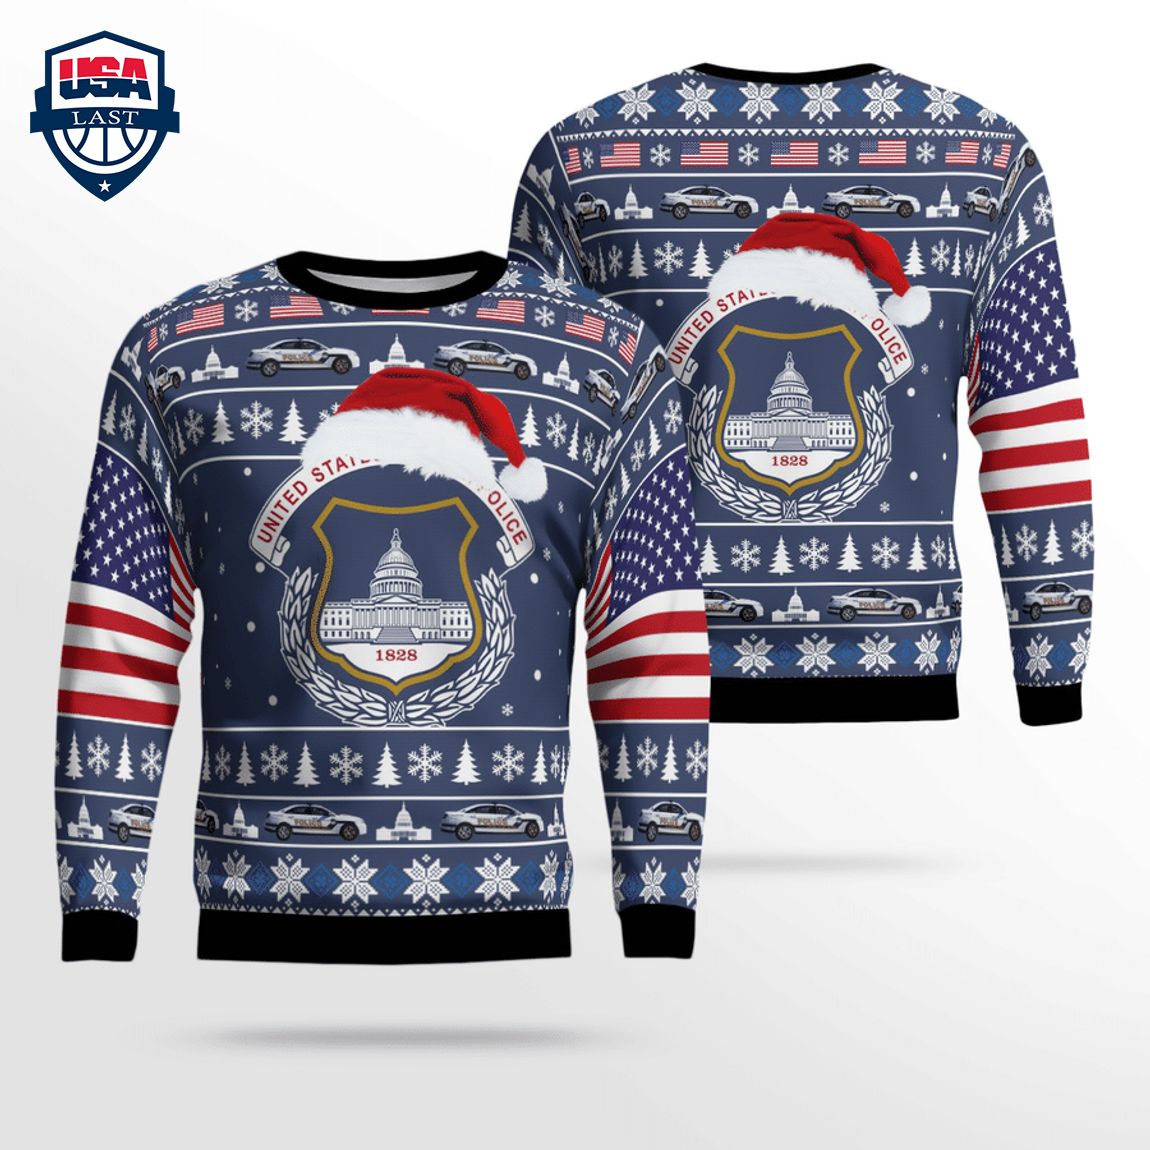 US Capitol Police Ver 2 3D Christmas Sweater - You tried editing this time?